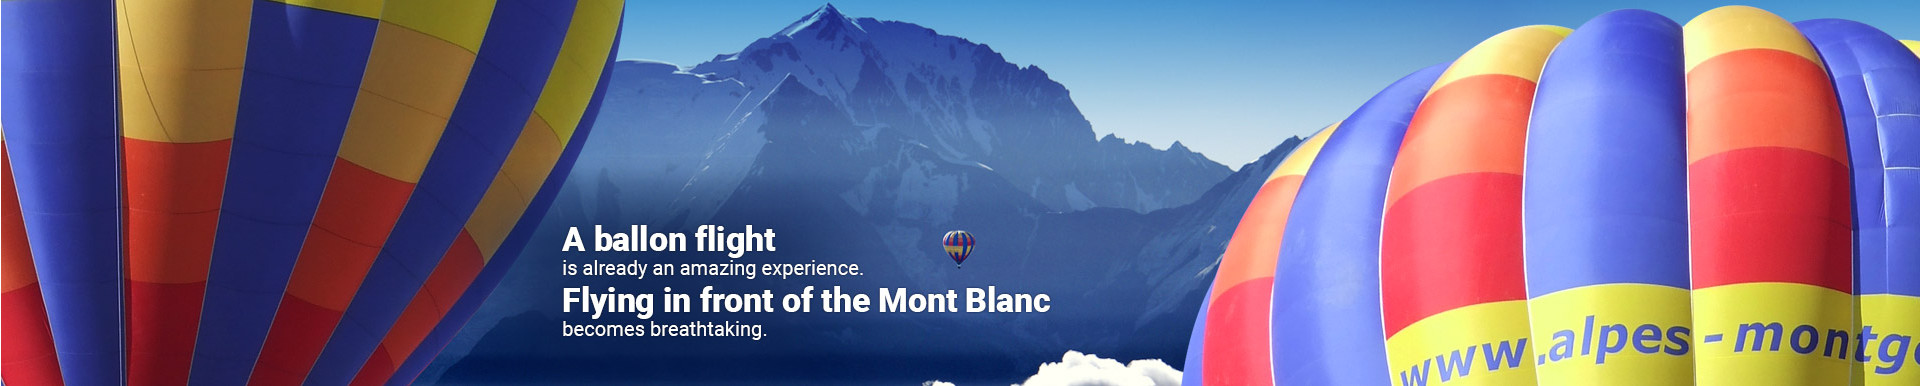 Front of the Mont Blanc